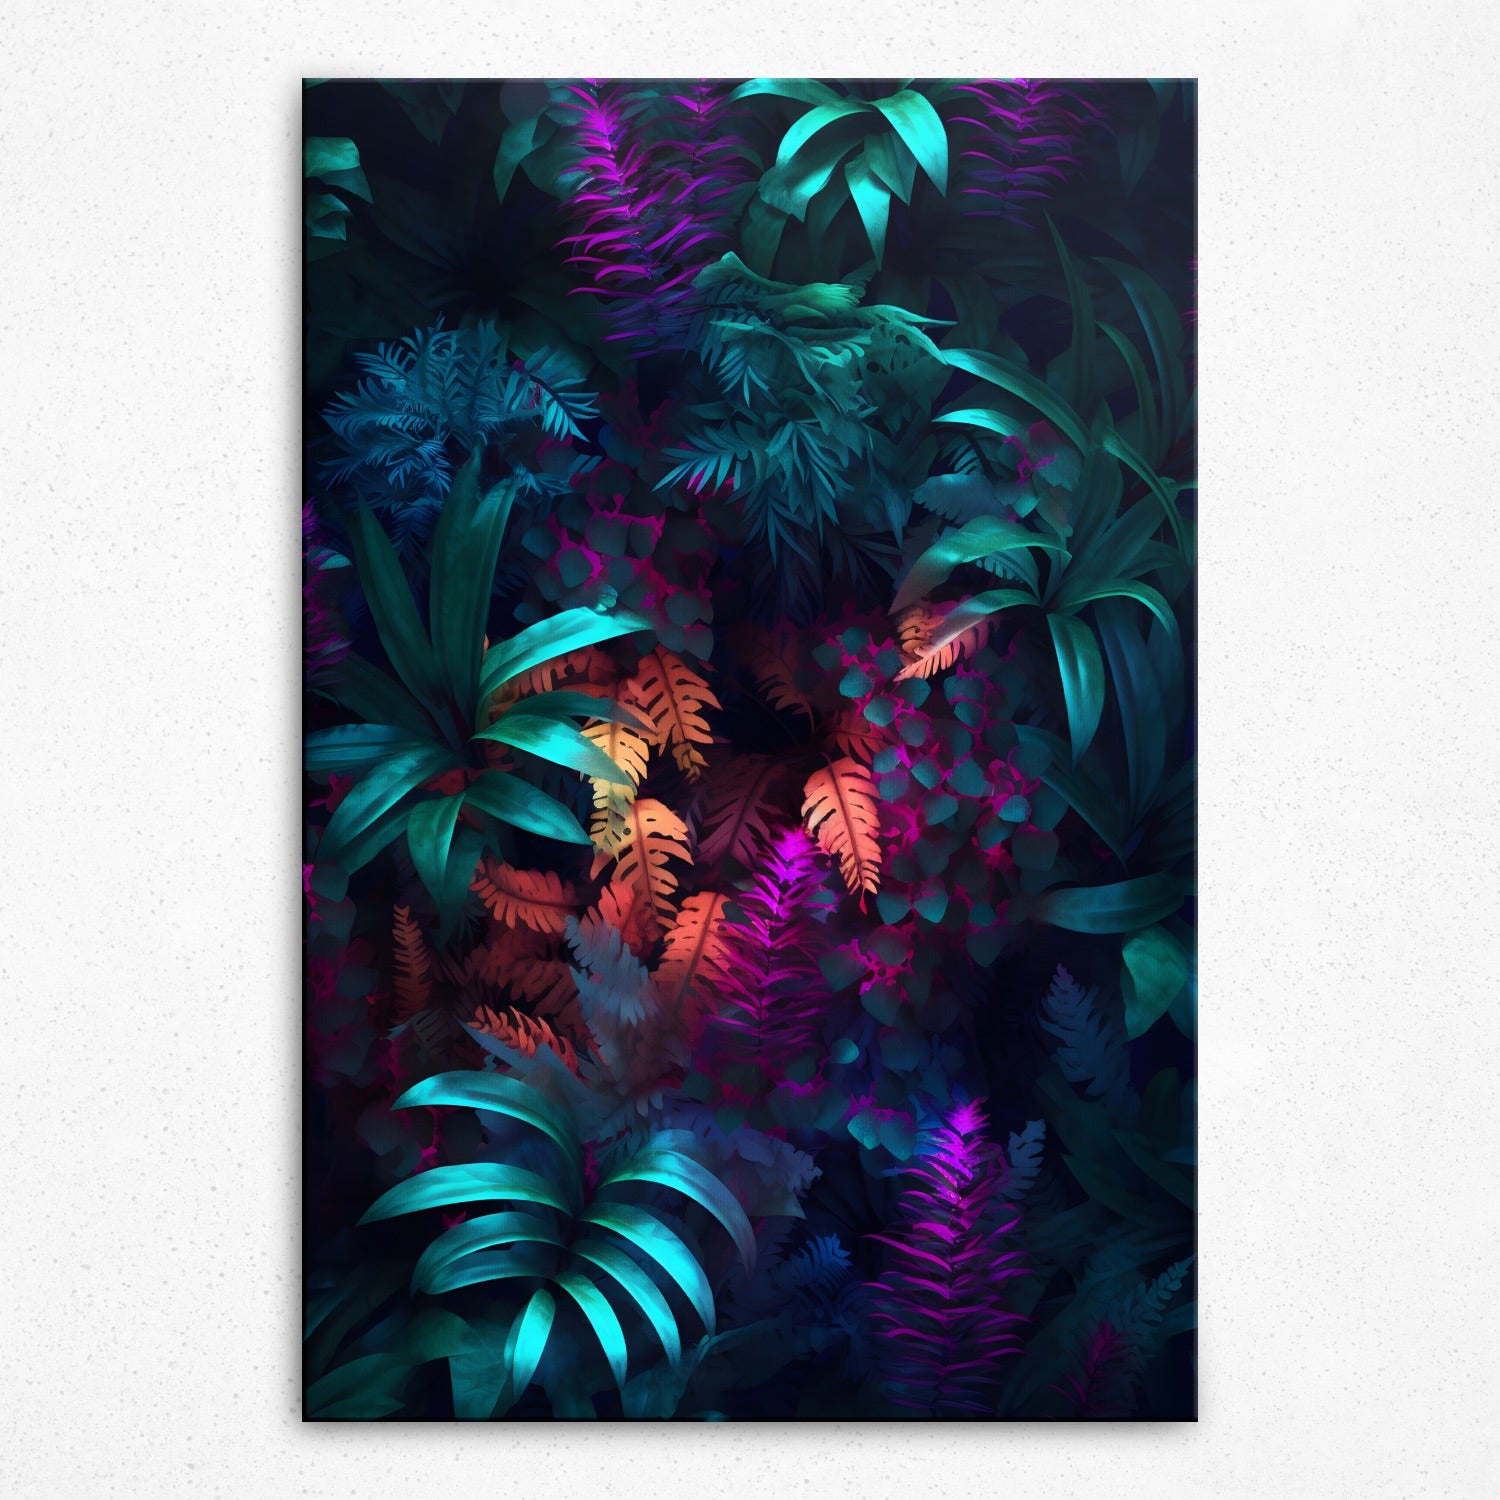 Chromatic Blossoms (Poster)